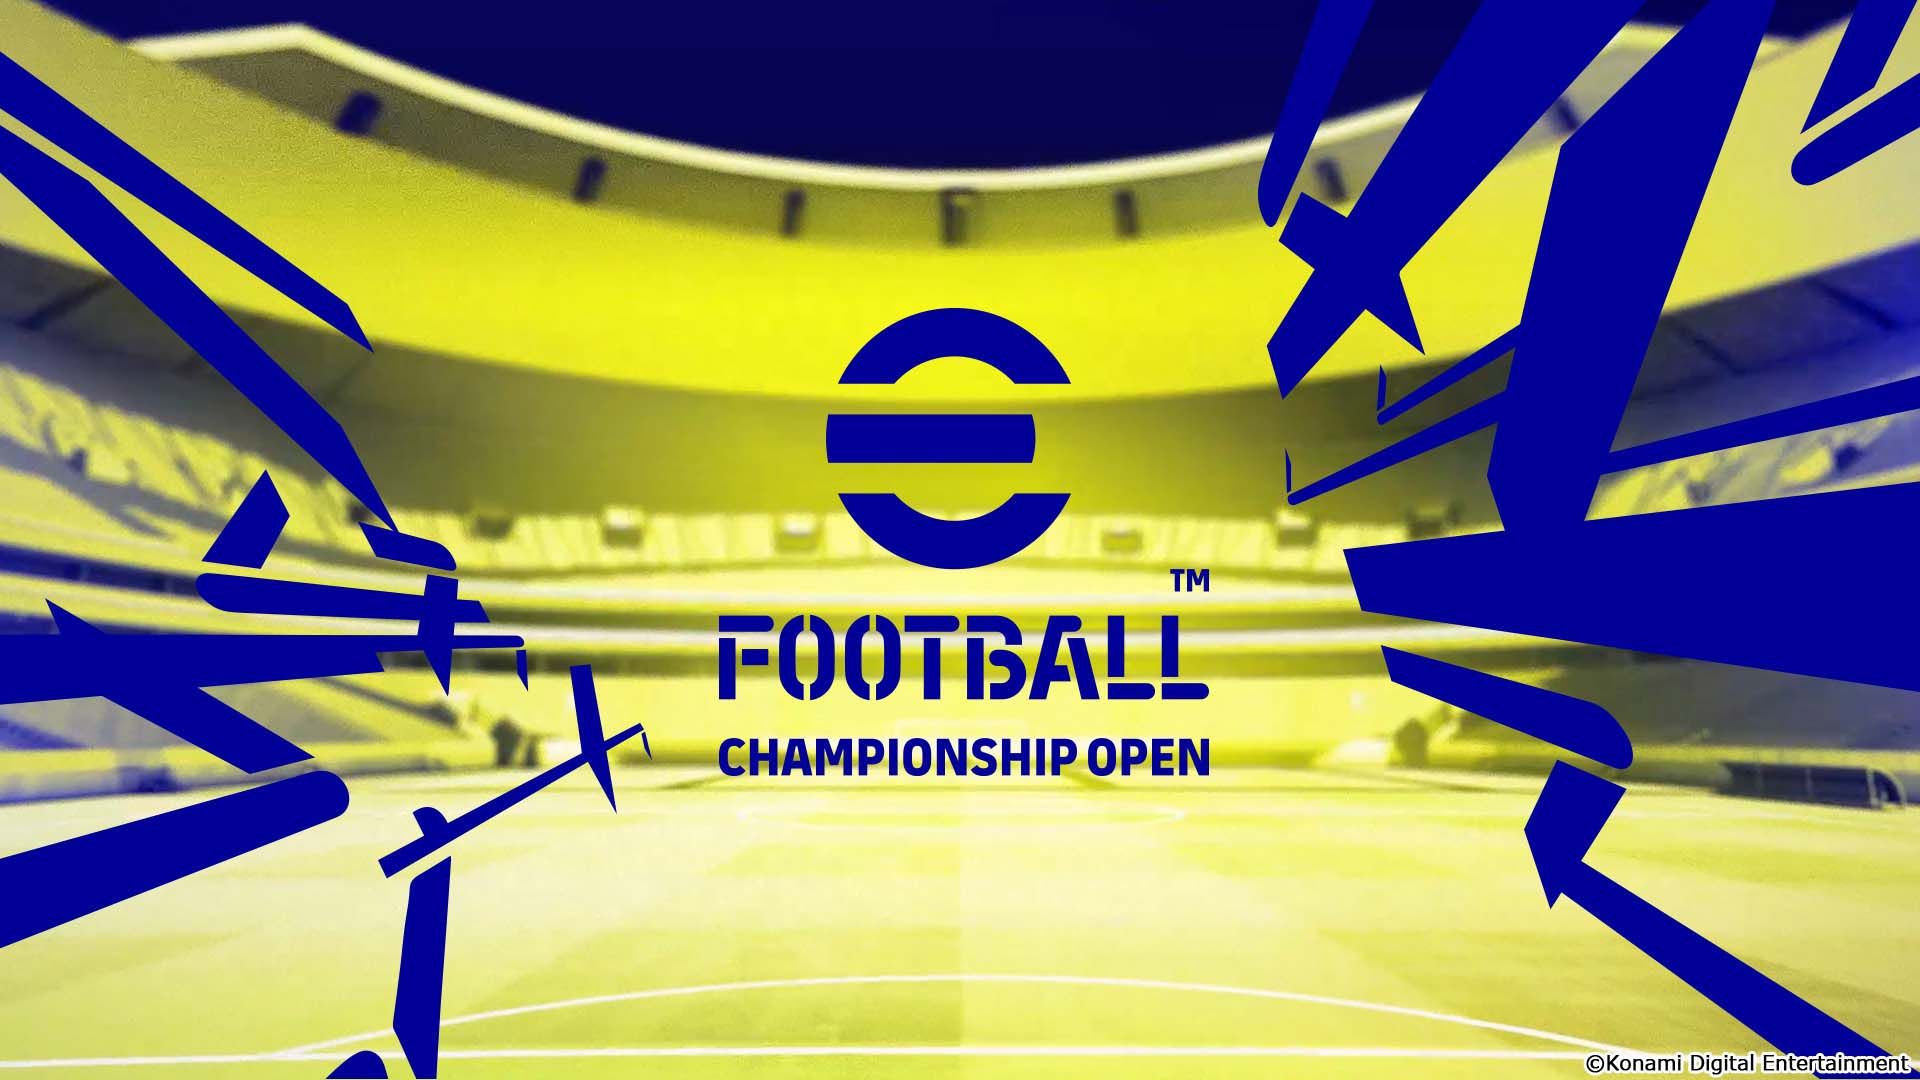 eFootball Championship Open 2022 Date, live stream, how to watch and more